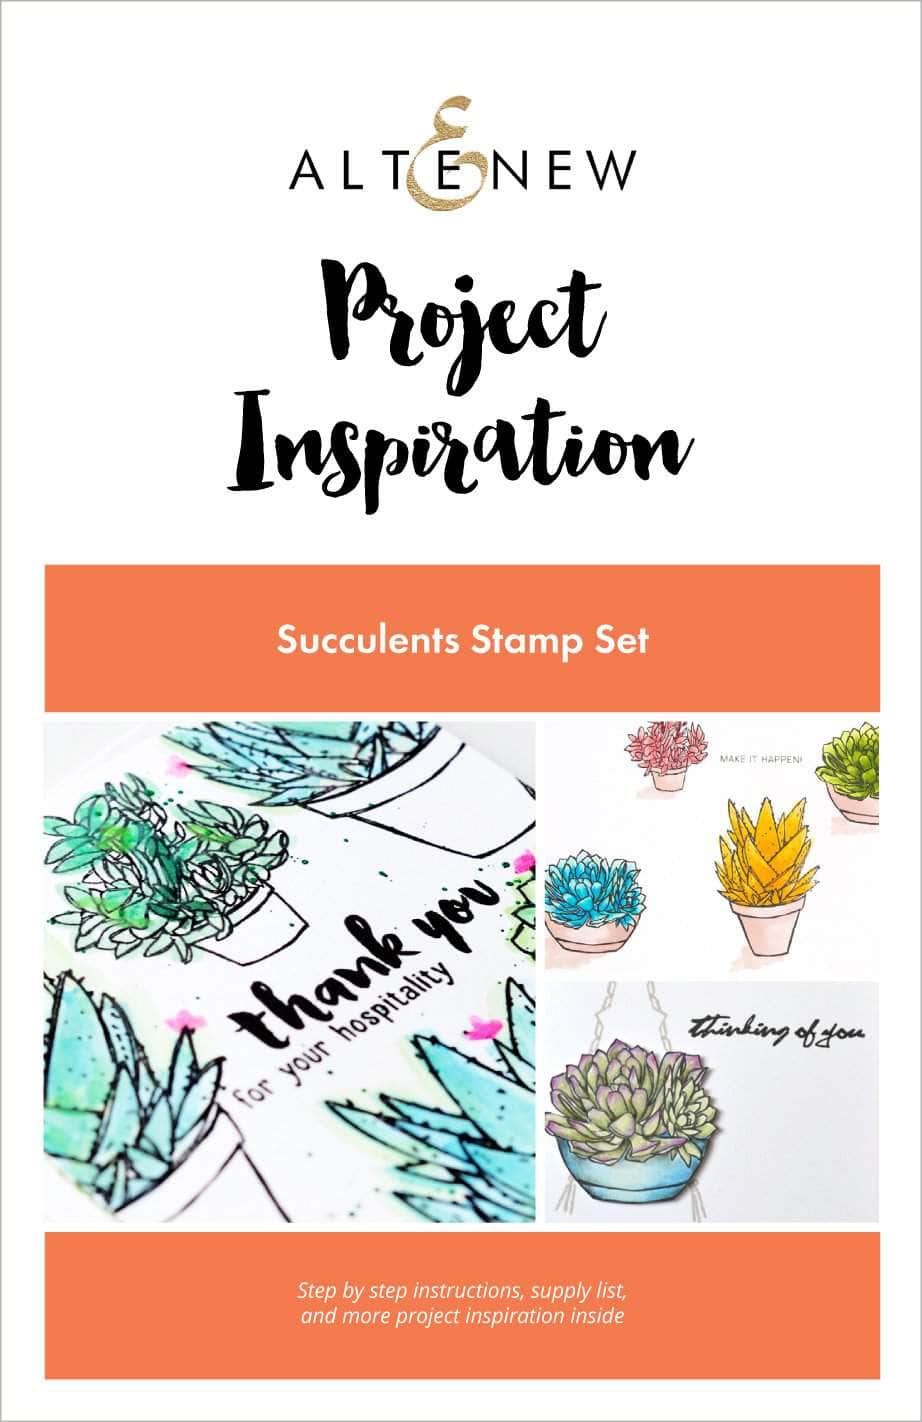 55Printing.com Printed Media Succulents Project Inspiration Guide